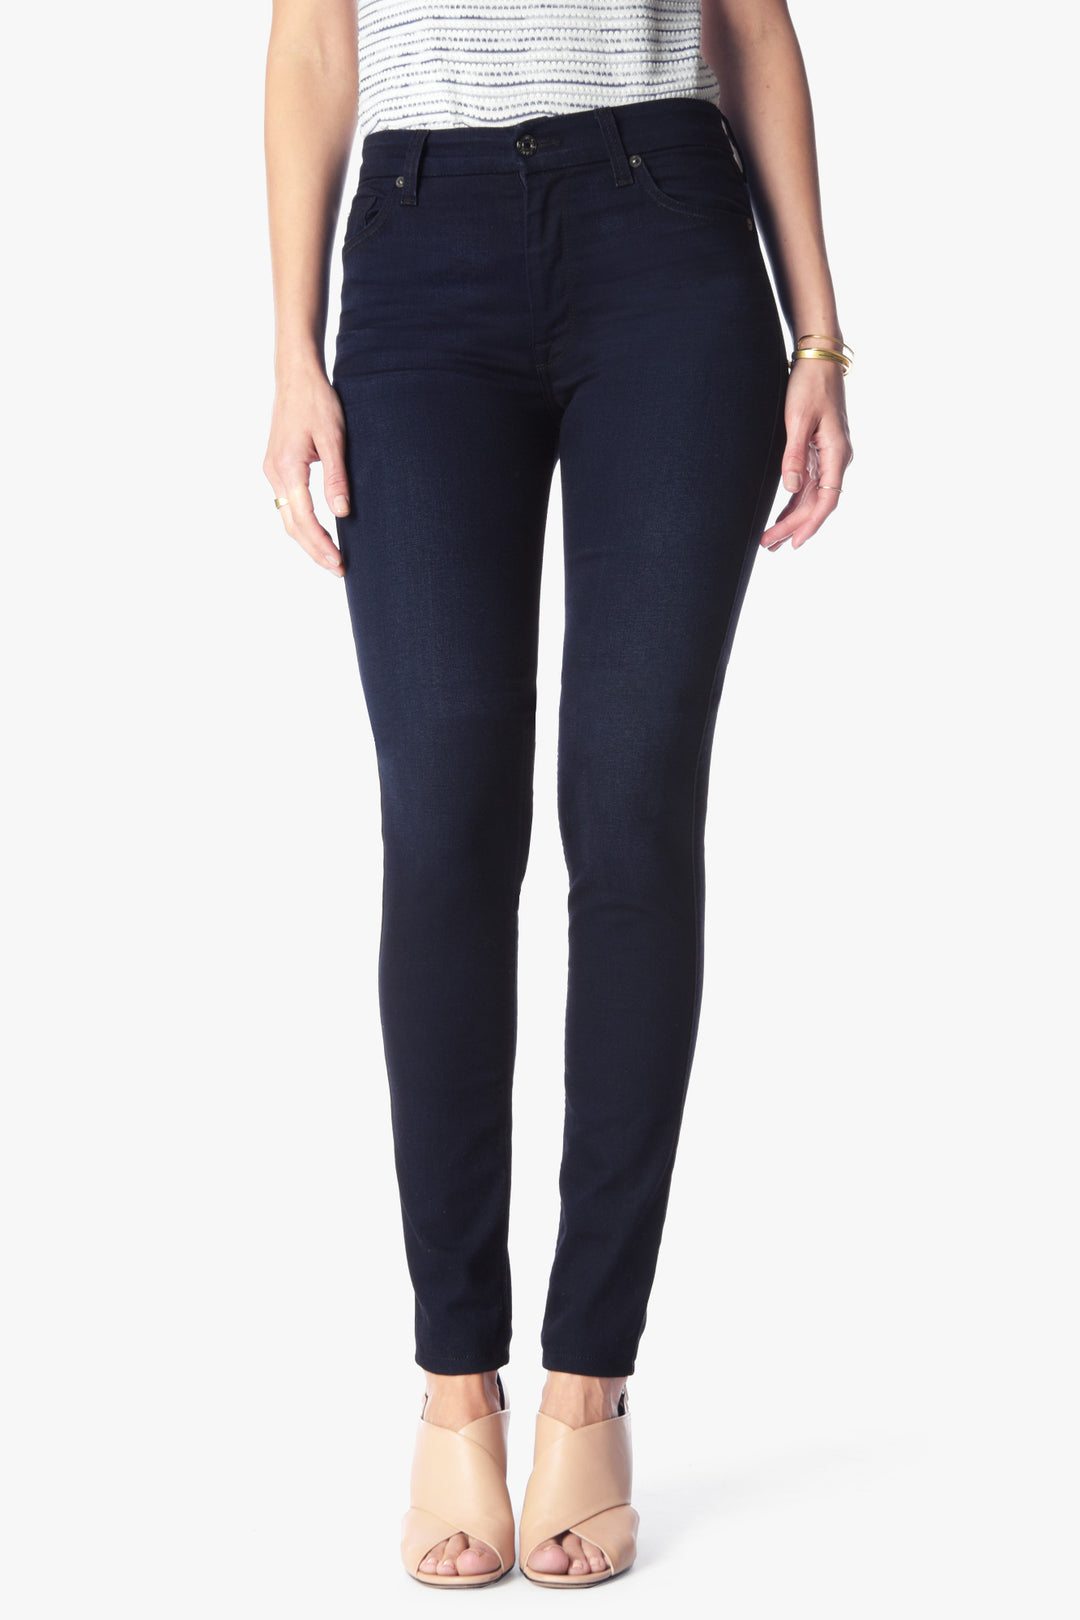 7 For All Mankind - High Waist Skinny in Blue Black River Thames